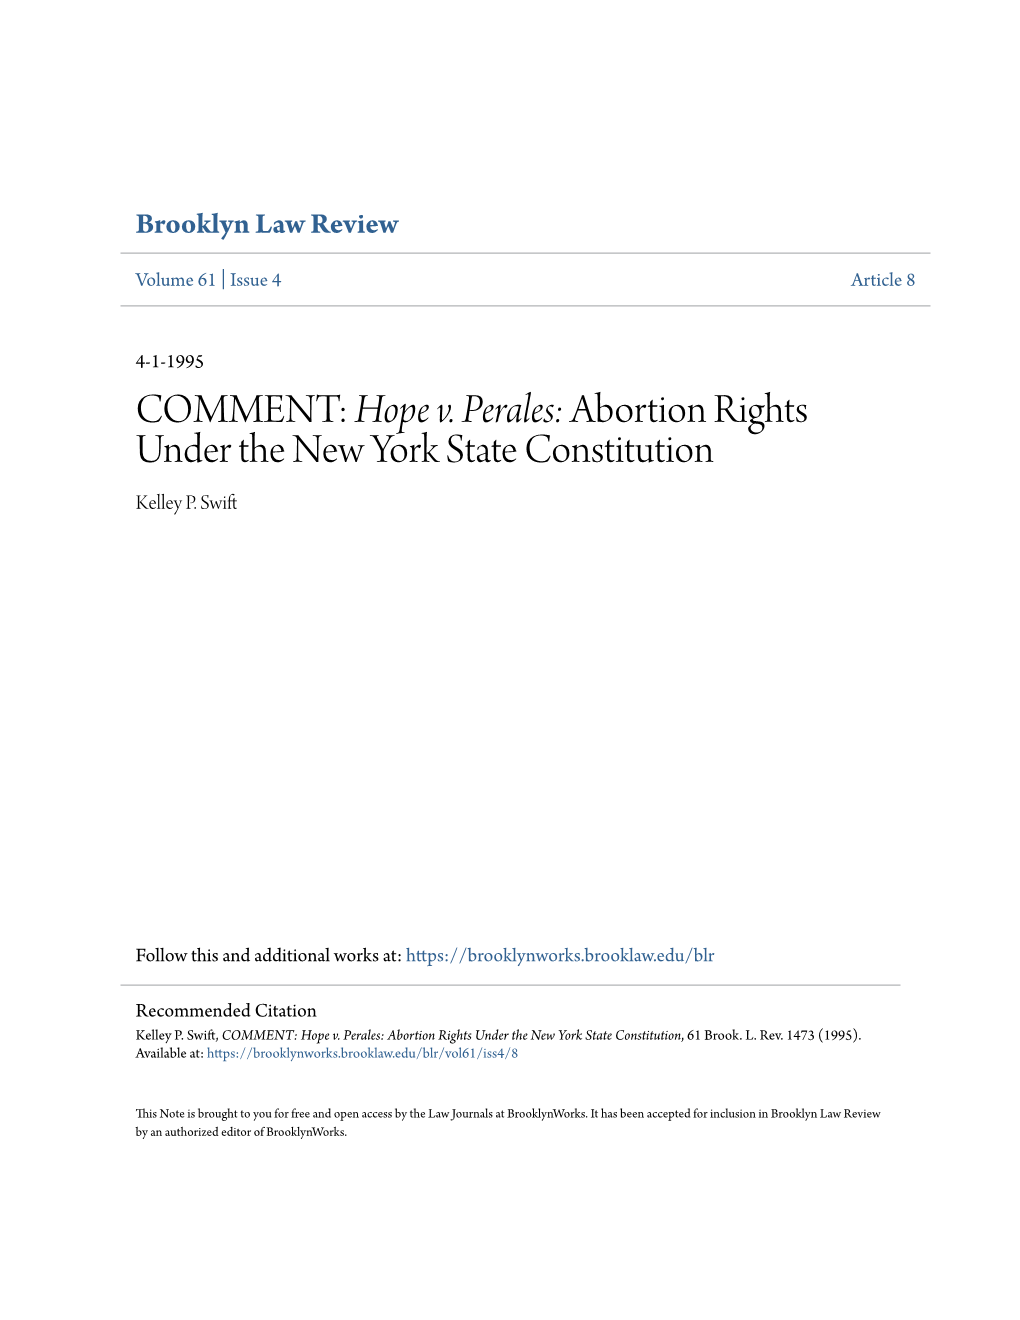 Hope V. Perales: Abortion Rights Under the New York State Constitution Kelley P